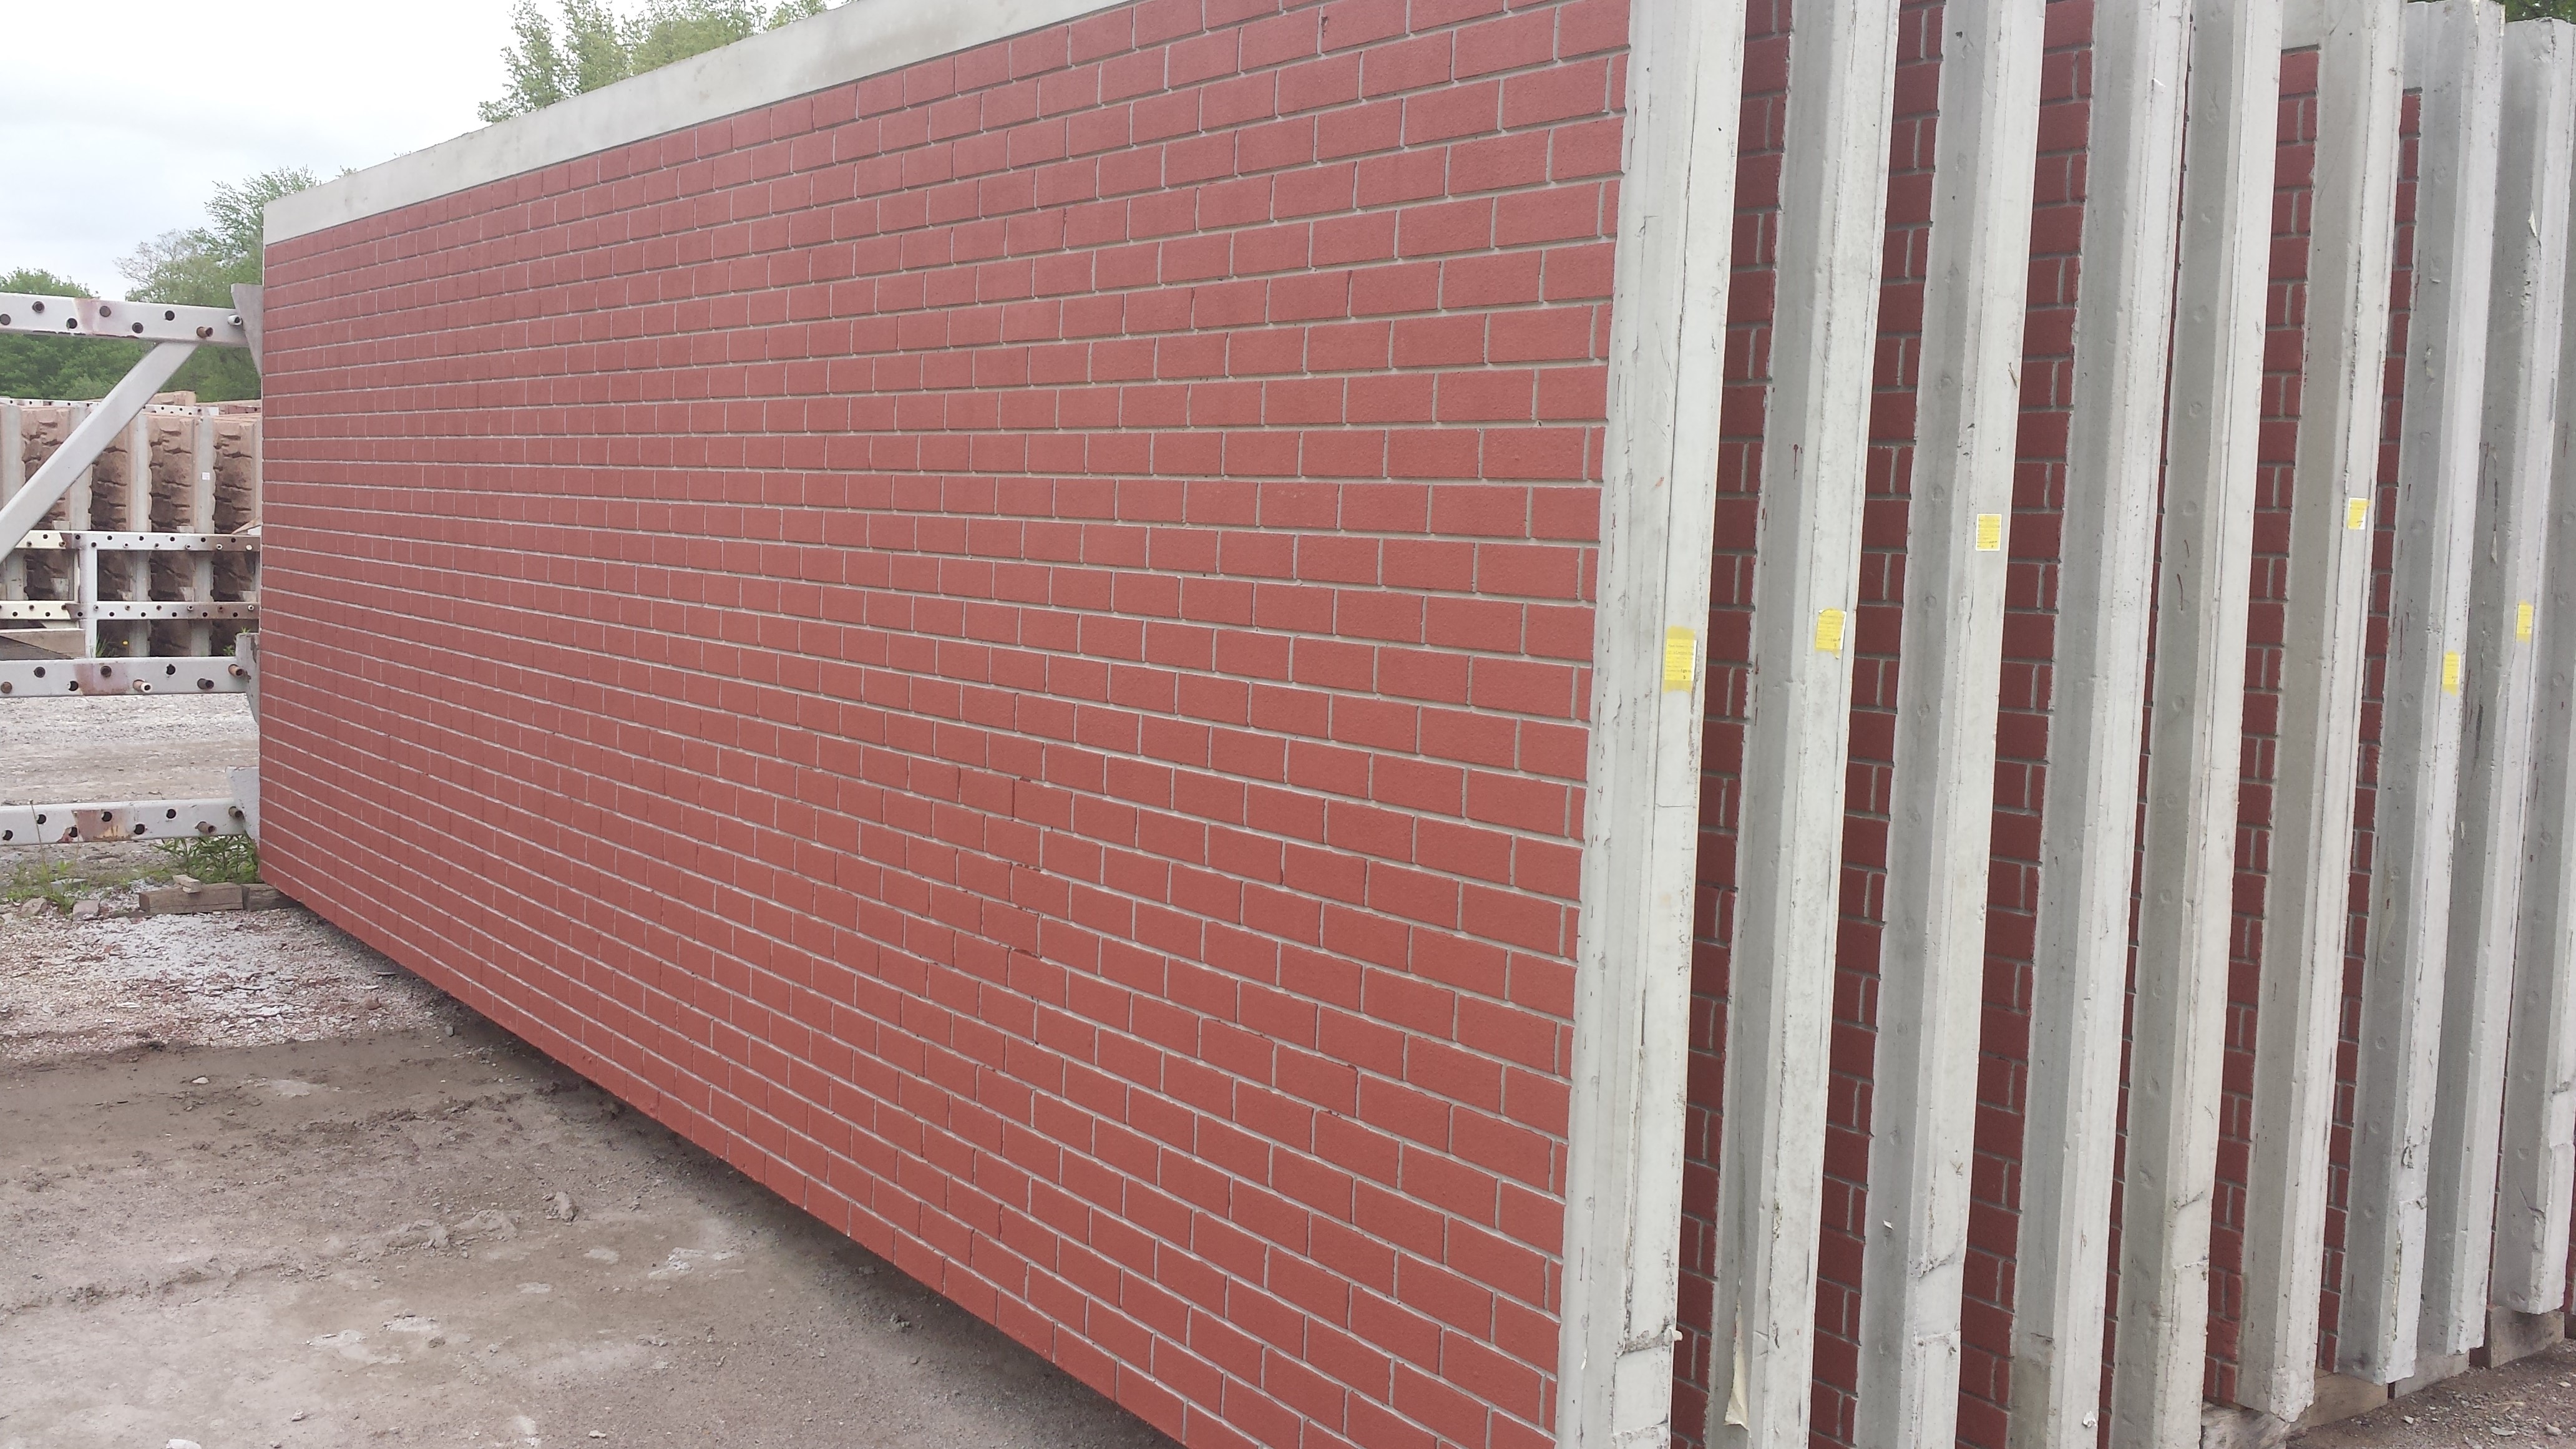 Stamped brick exterior: Such sound walls are often exposed to harsh environmental conditions dividing interstates and communities. PENETRON ADMIX’s crystalline technology protects the walls from salt